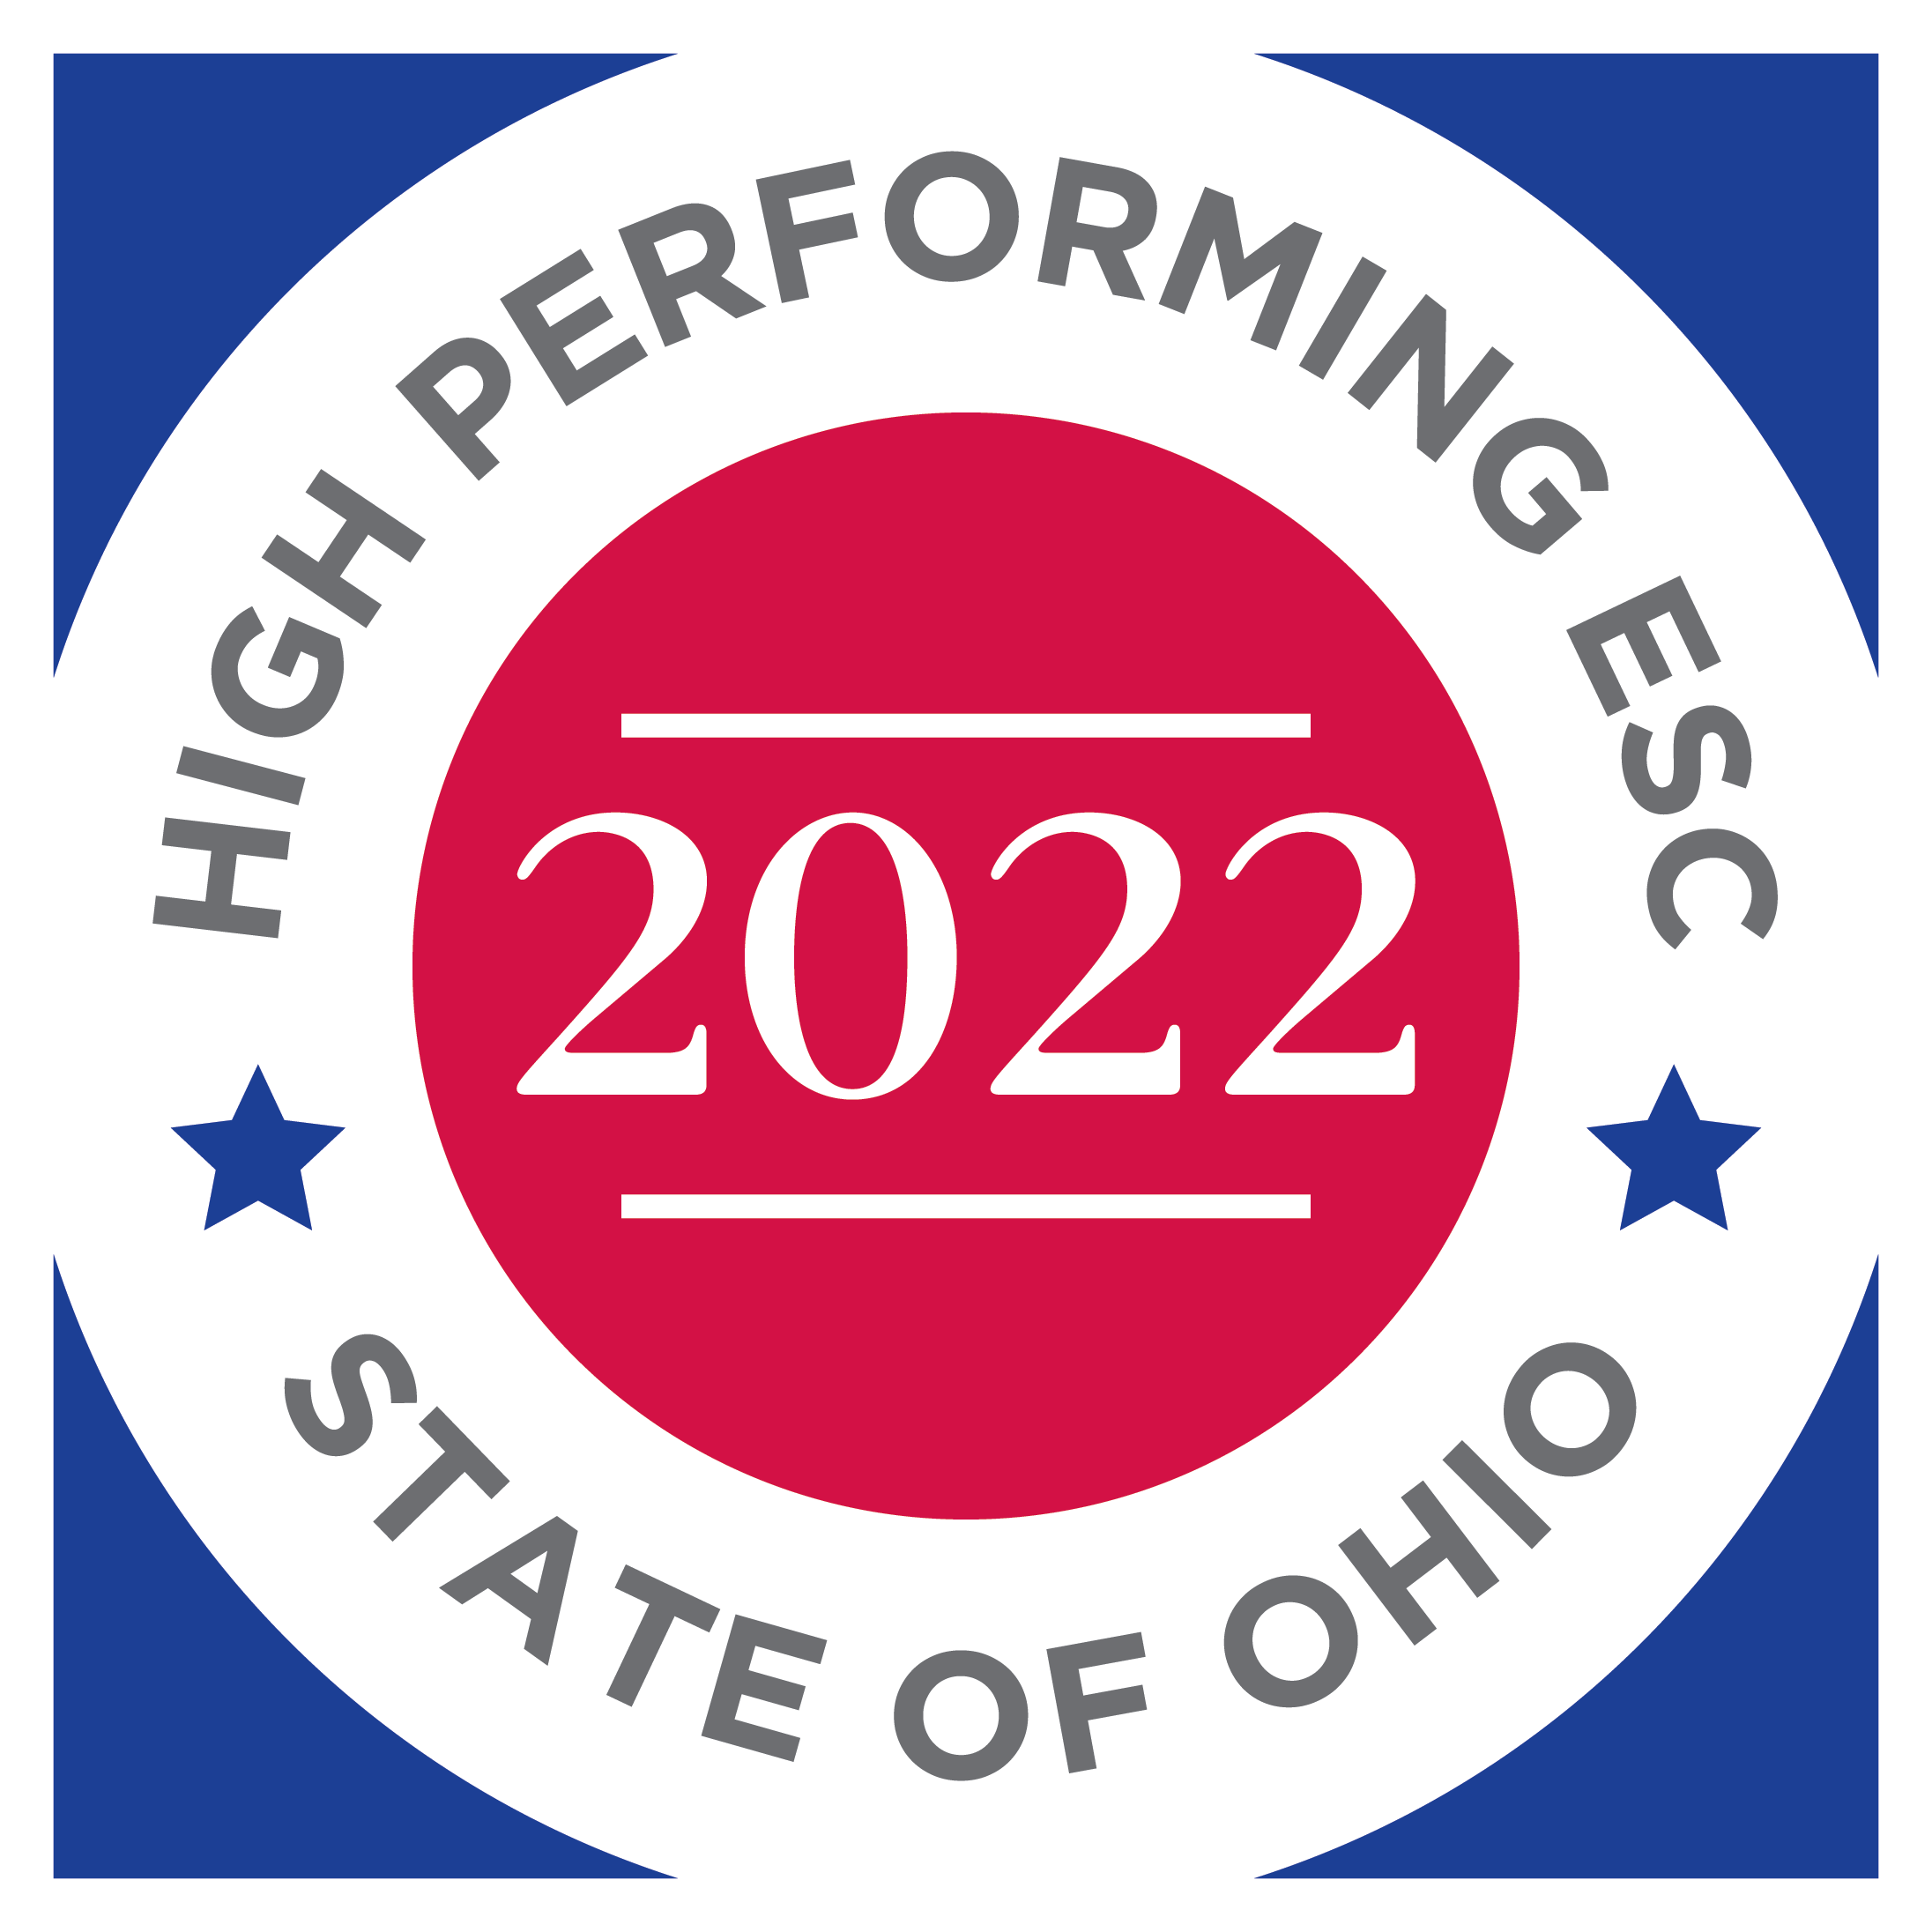 High performing ESC, state of ohio, 2022